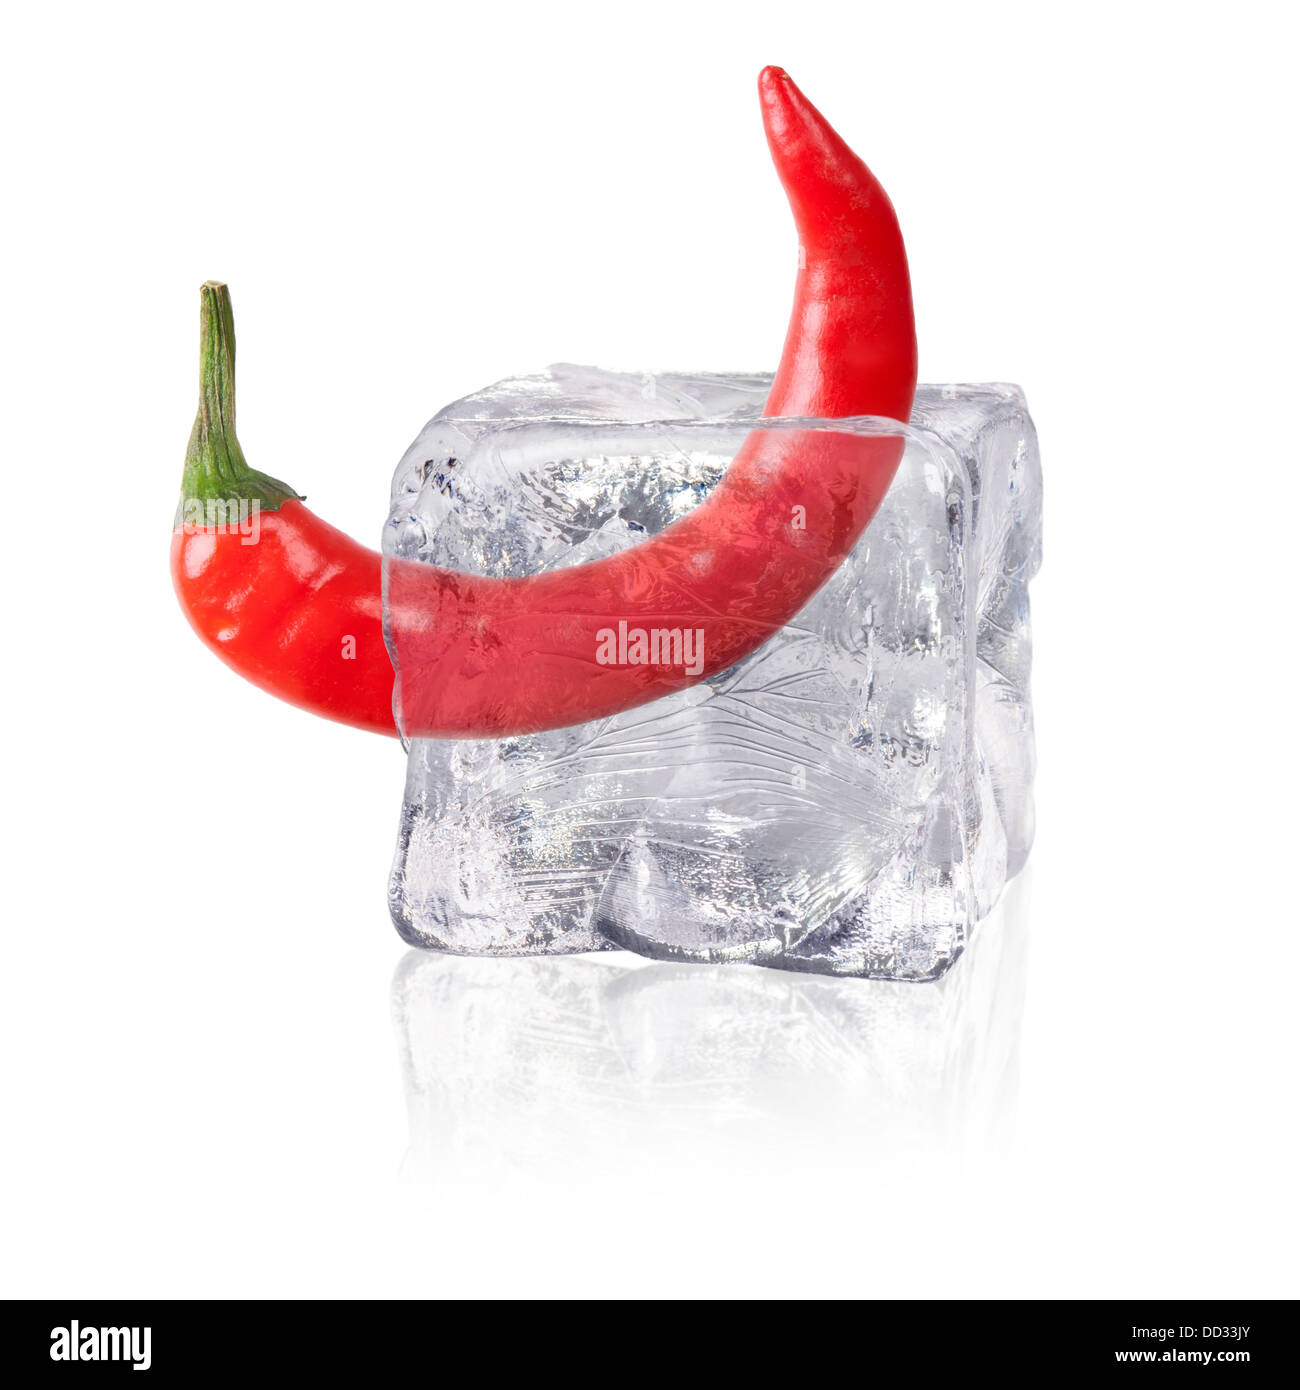 a chili enclosed in an ice cube before white background Stock Photo